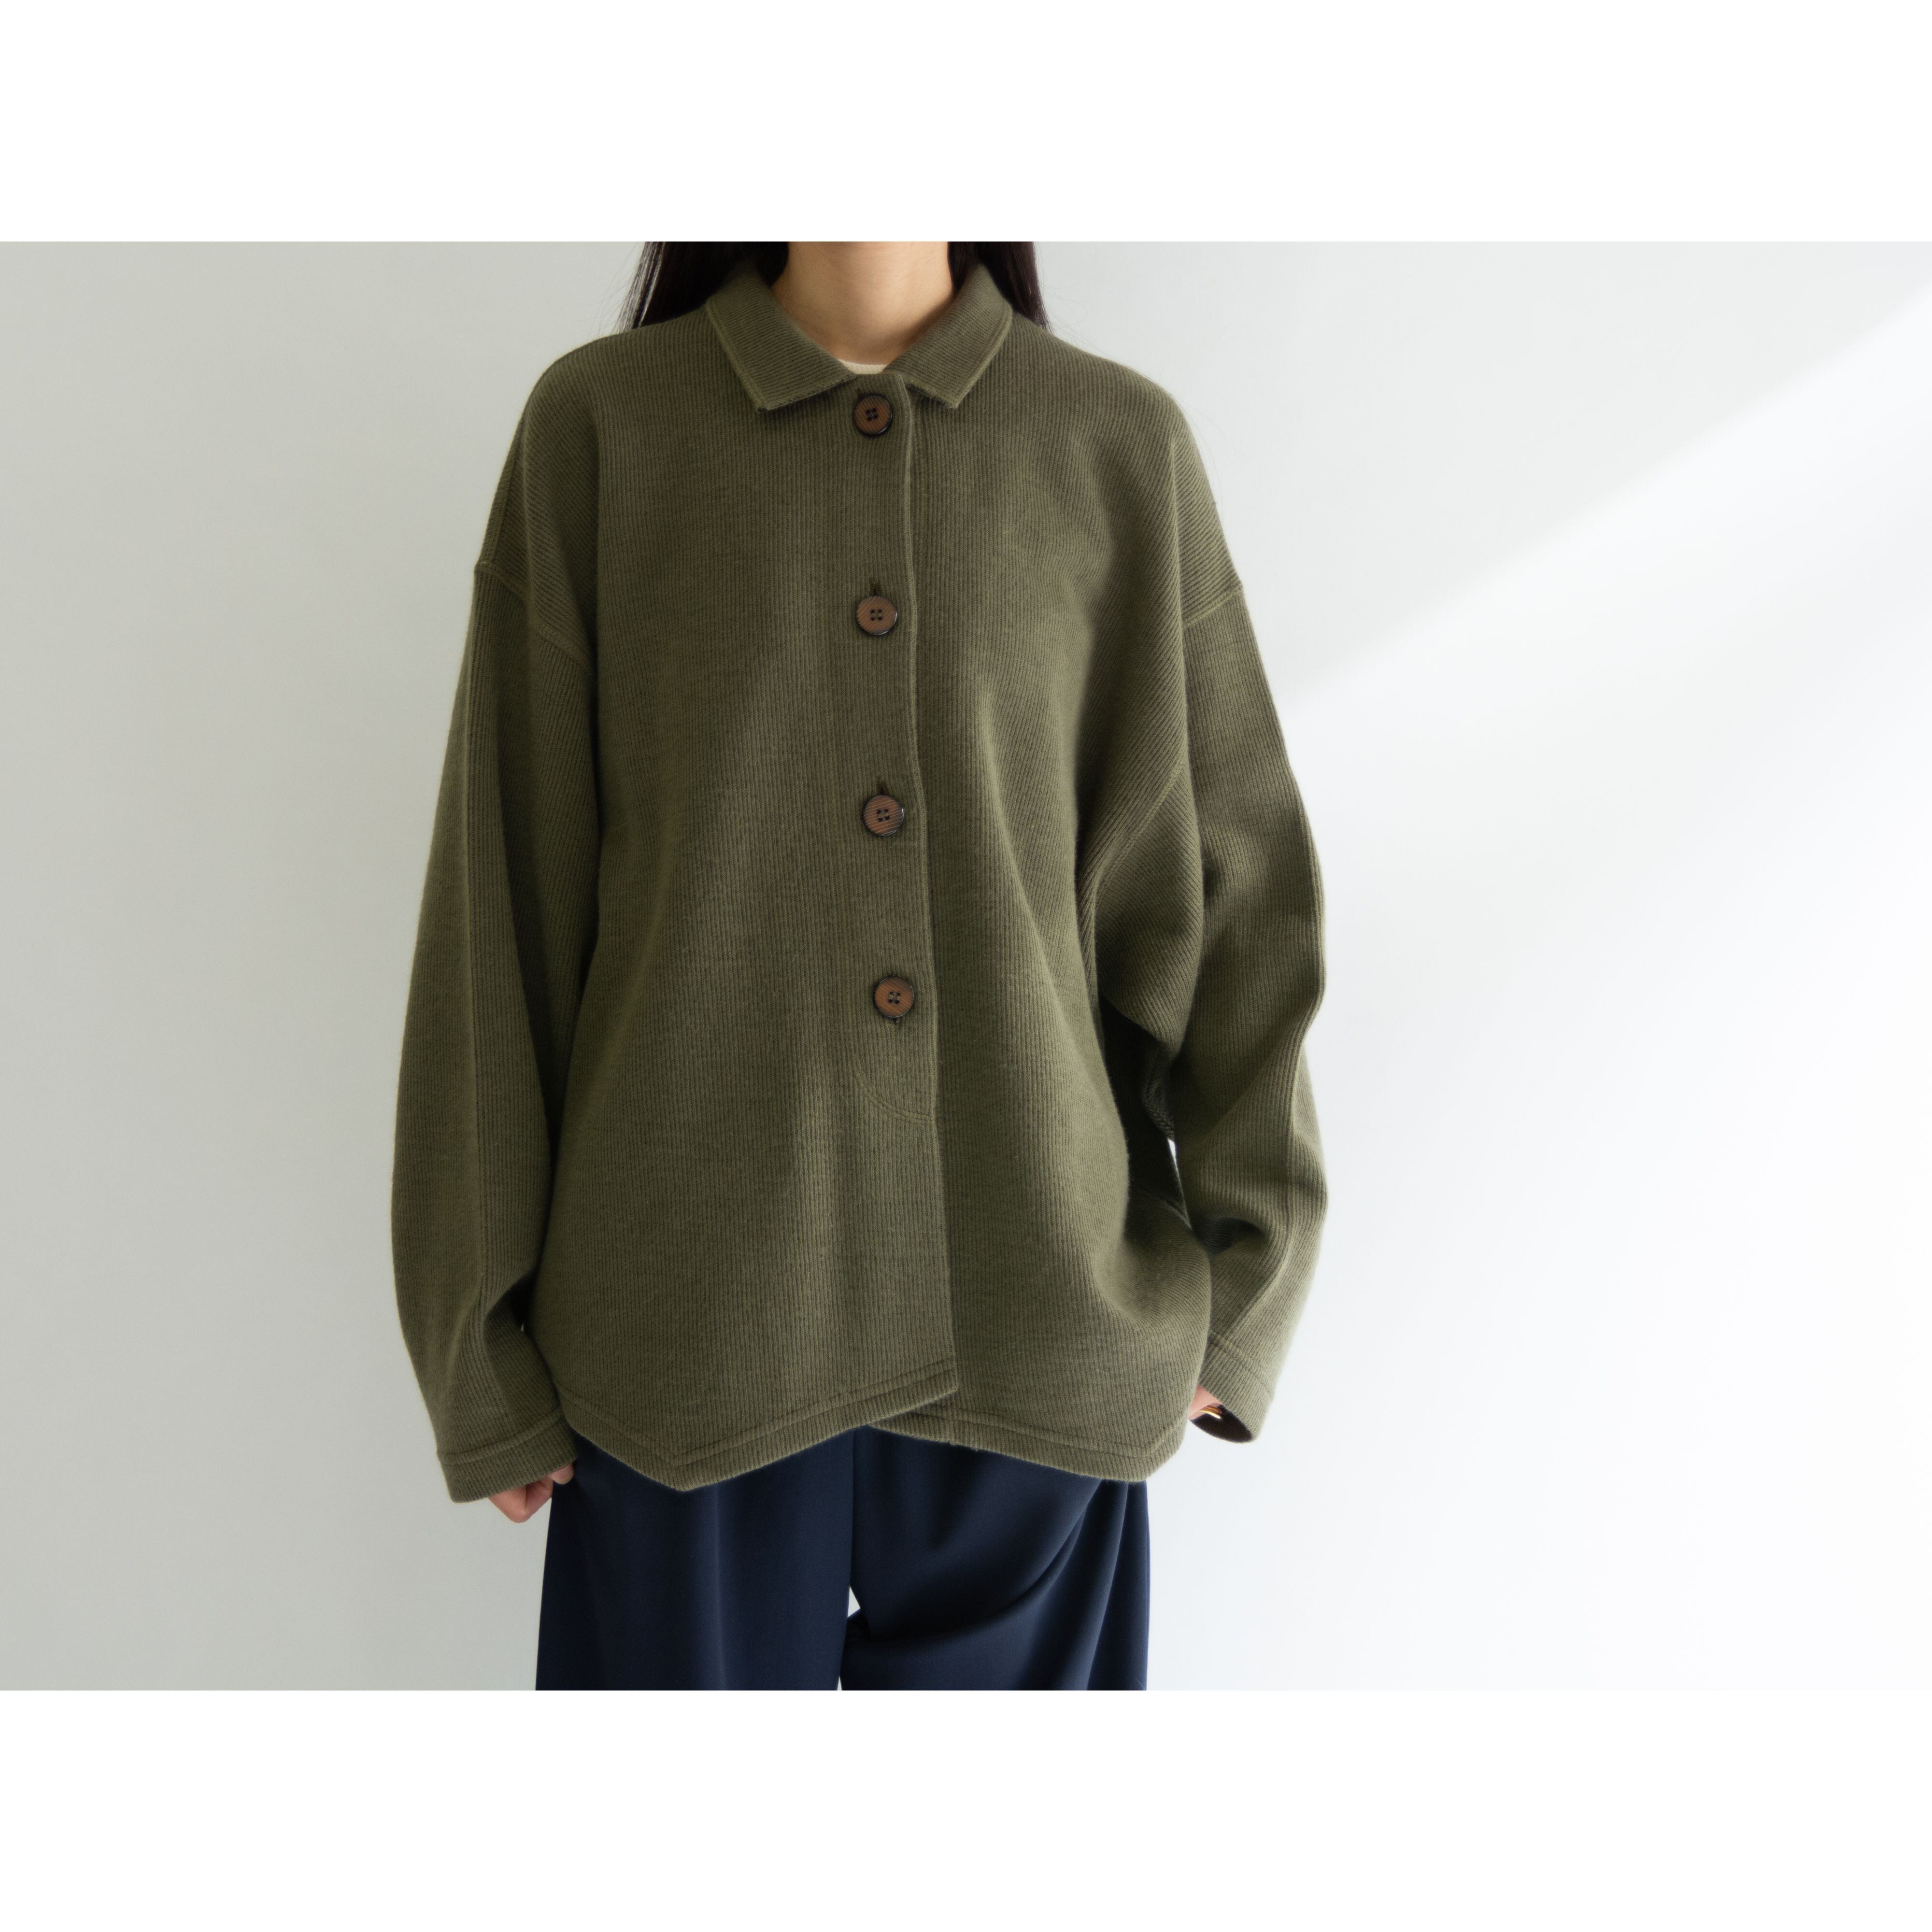 RODIER】Made in France Wool-Acrylic Knit Jacket（ロディエ フランス ...